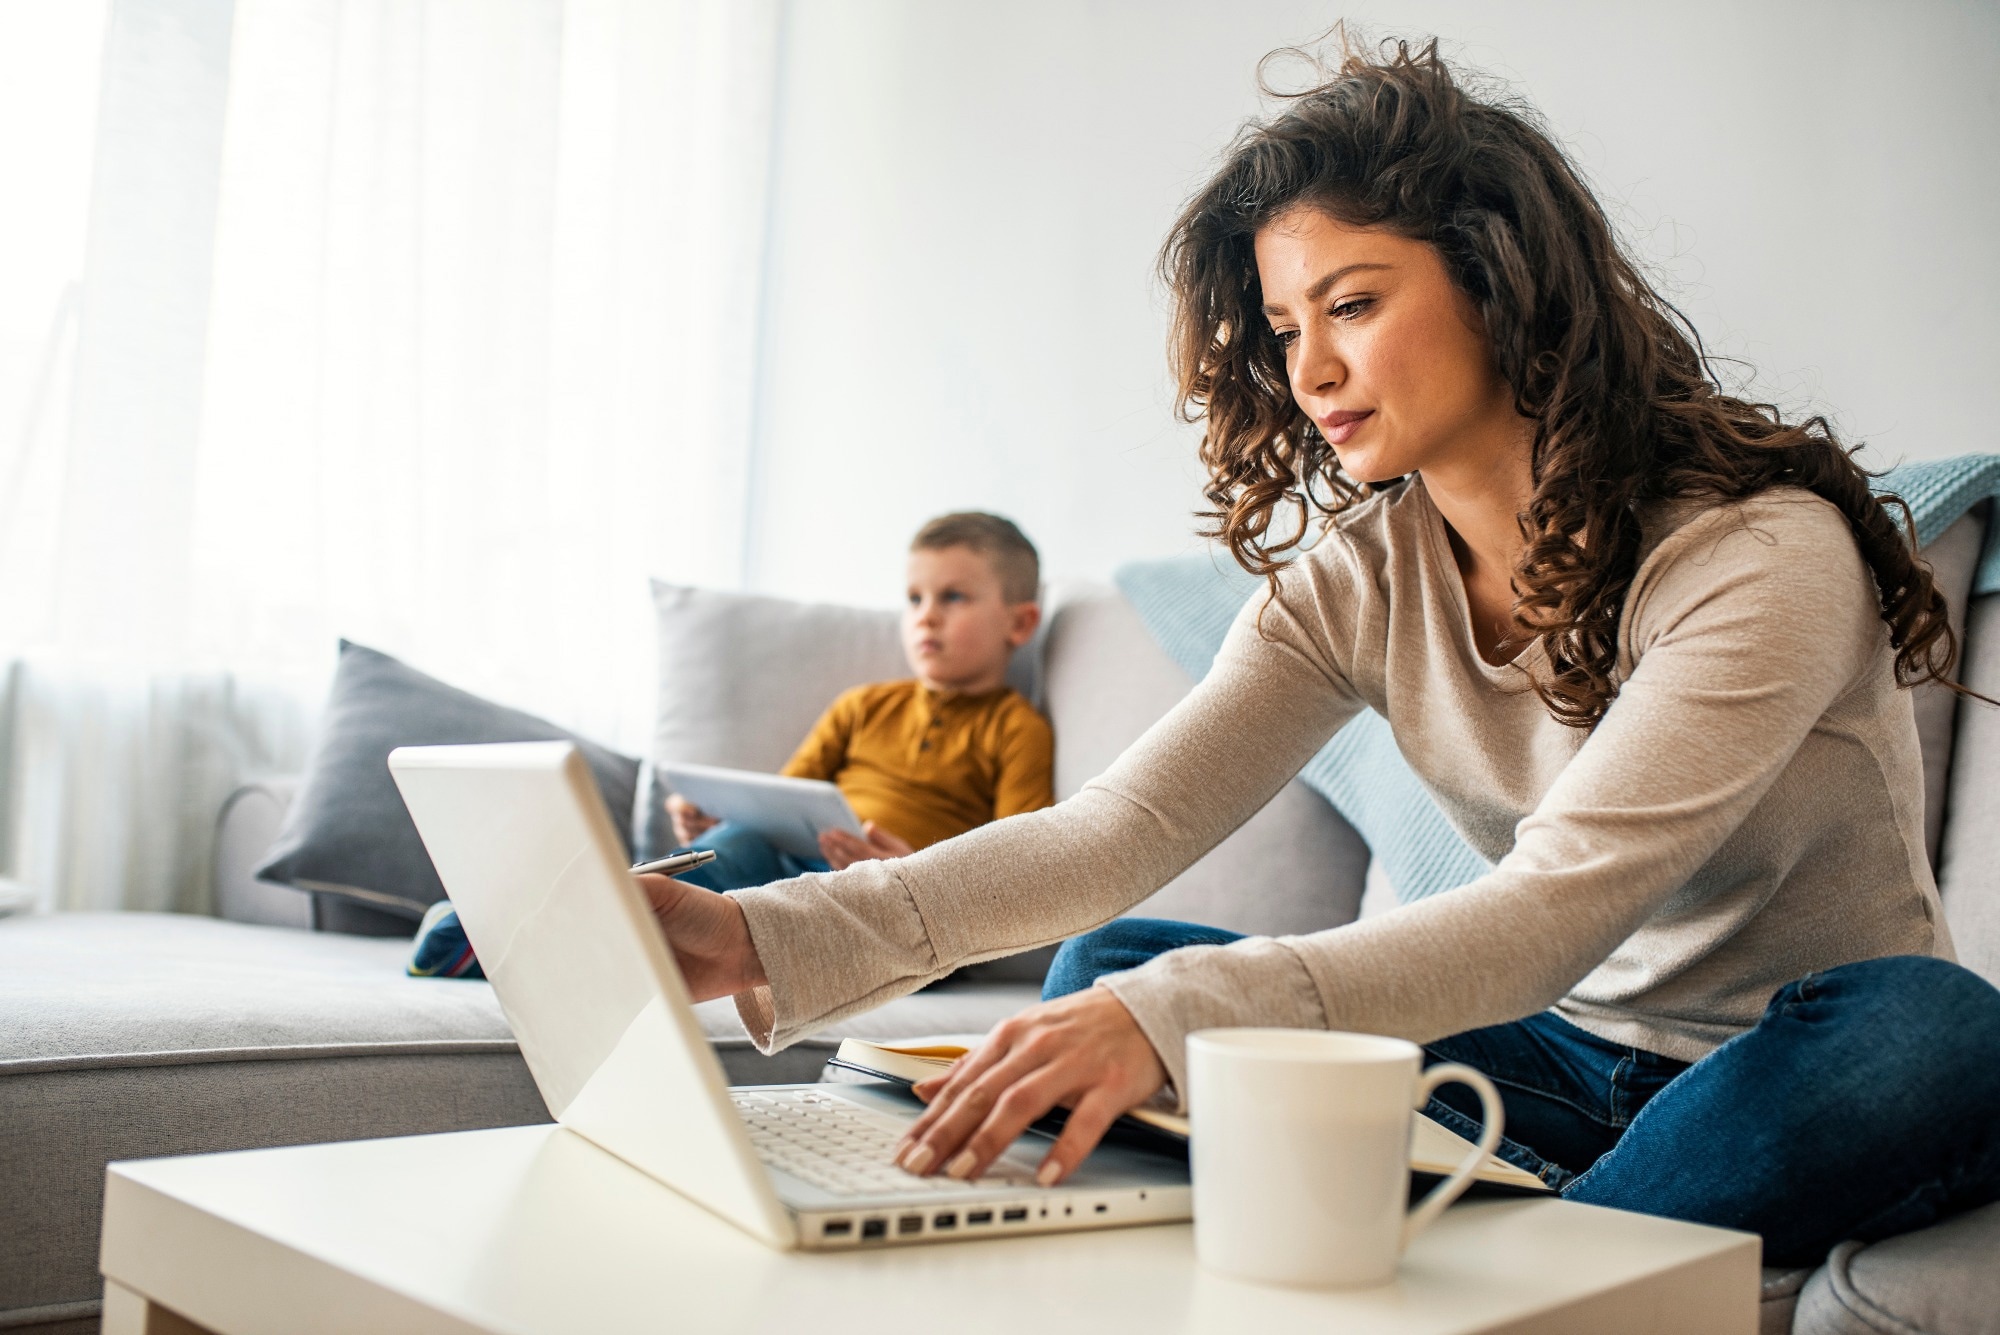 Study: Home working and social and mental wellbeing at different stages of the COVID-19 pandemic in the UK: Evidence from 7 longitudinal population surveys. Image Credit: Dragana Gordic / Shutterstock